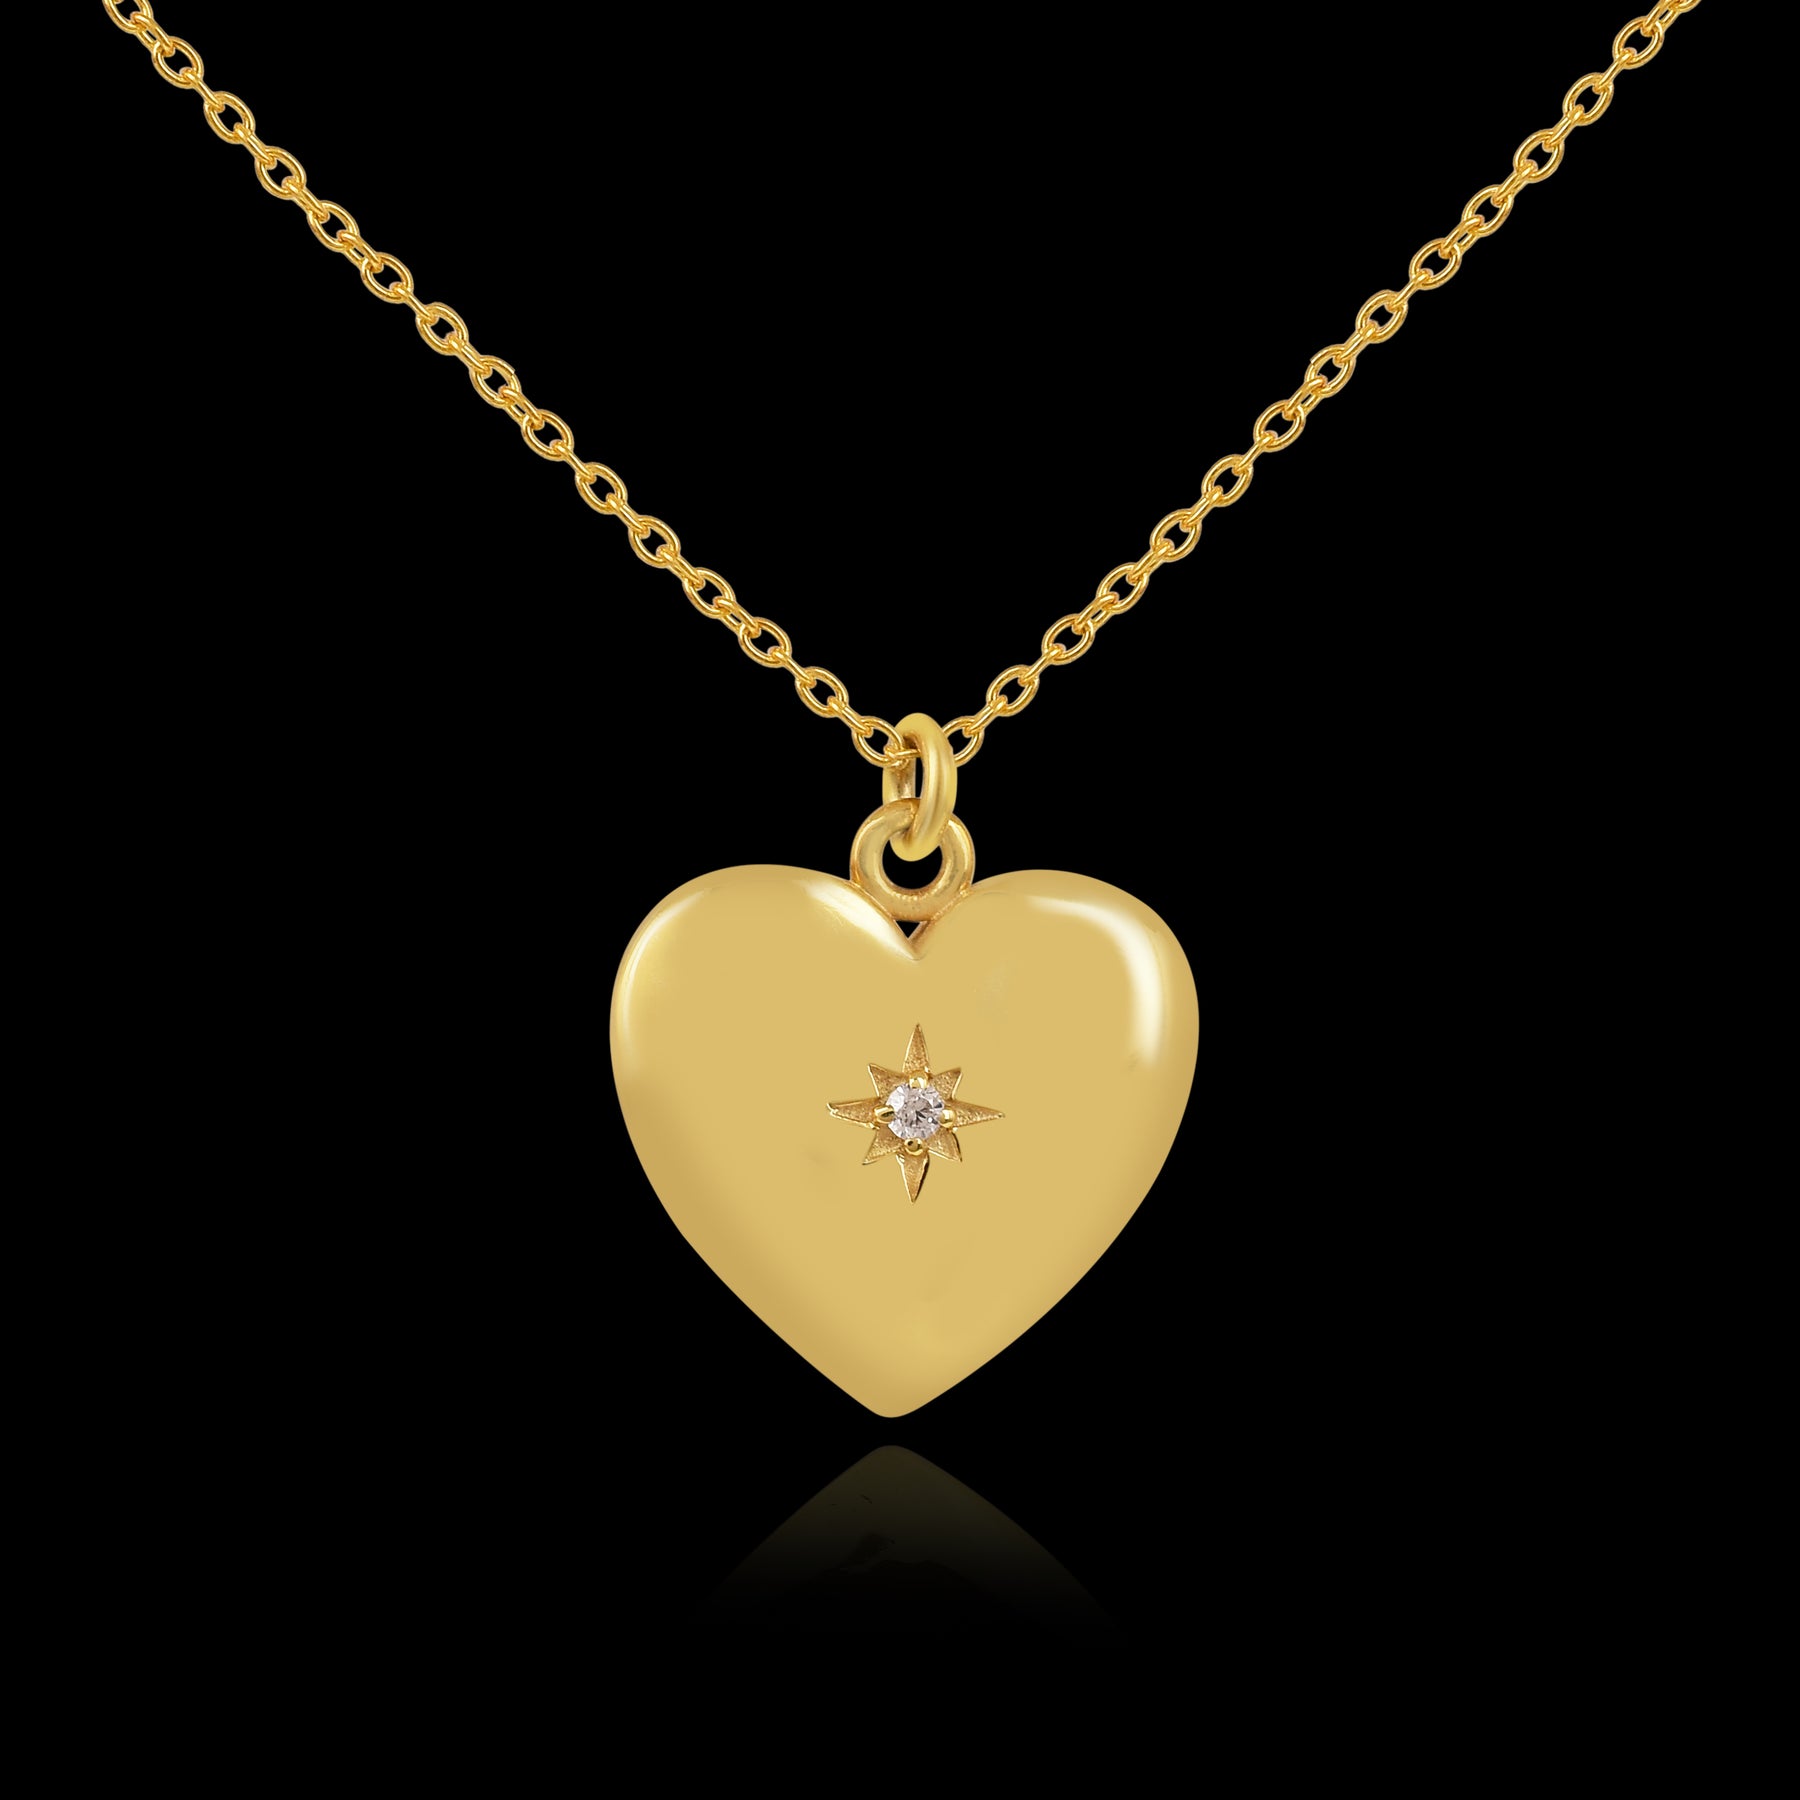 925 Sterling Silver Heart Gold Plated Pendant with Chain Gift for Her